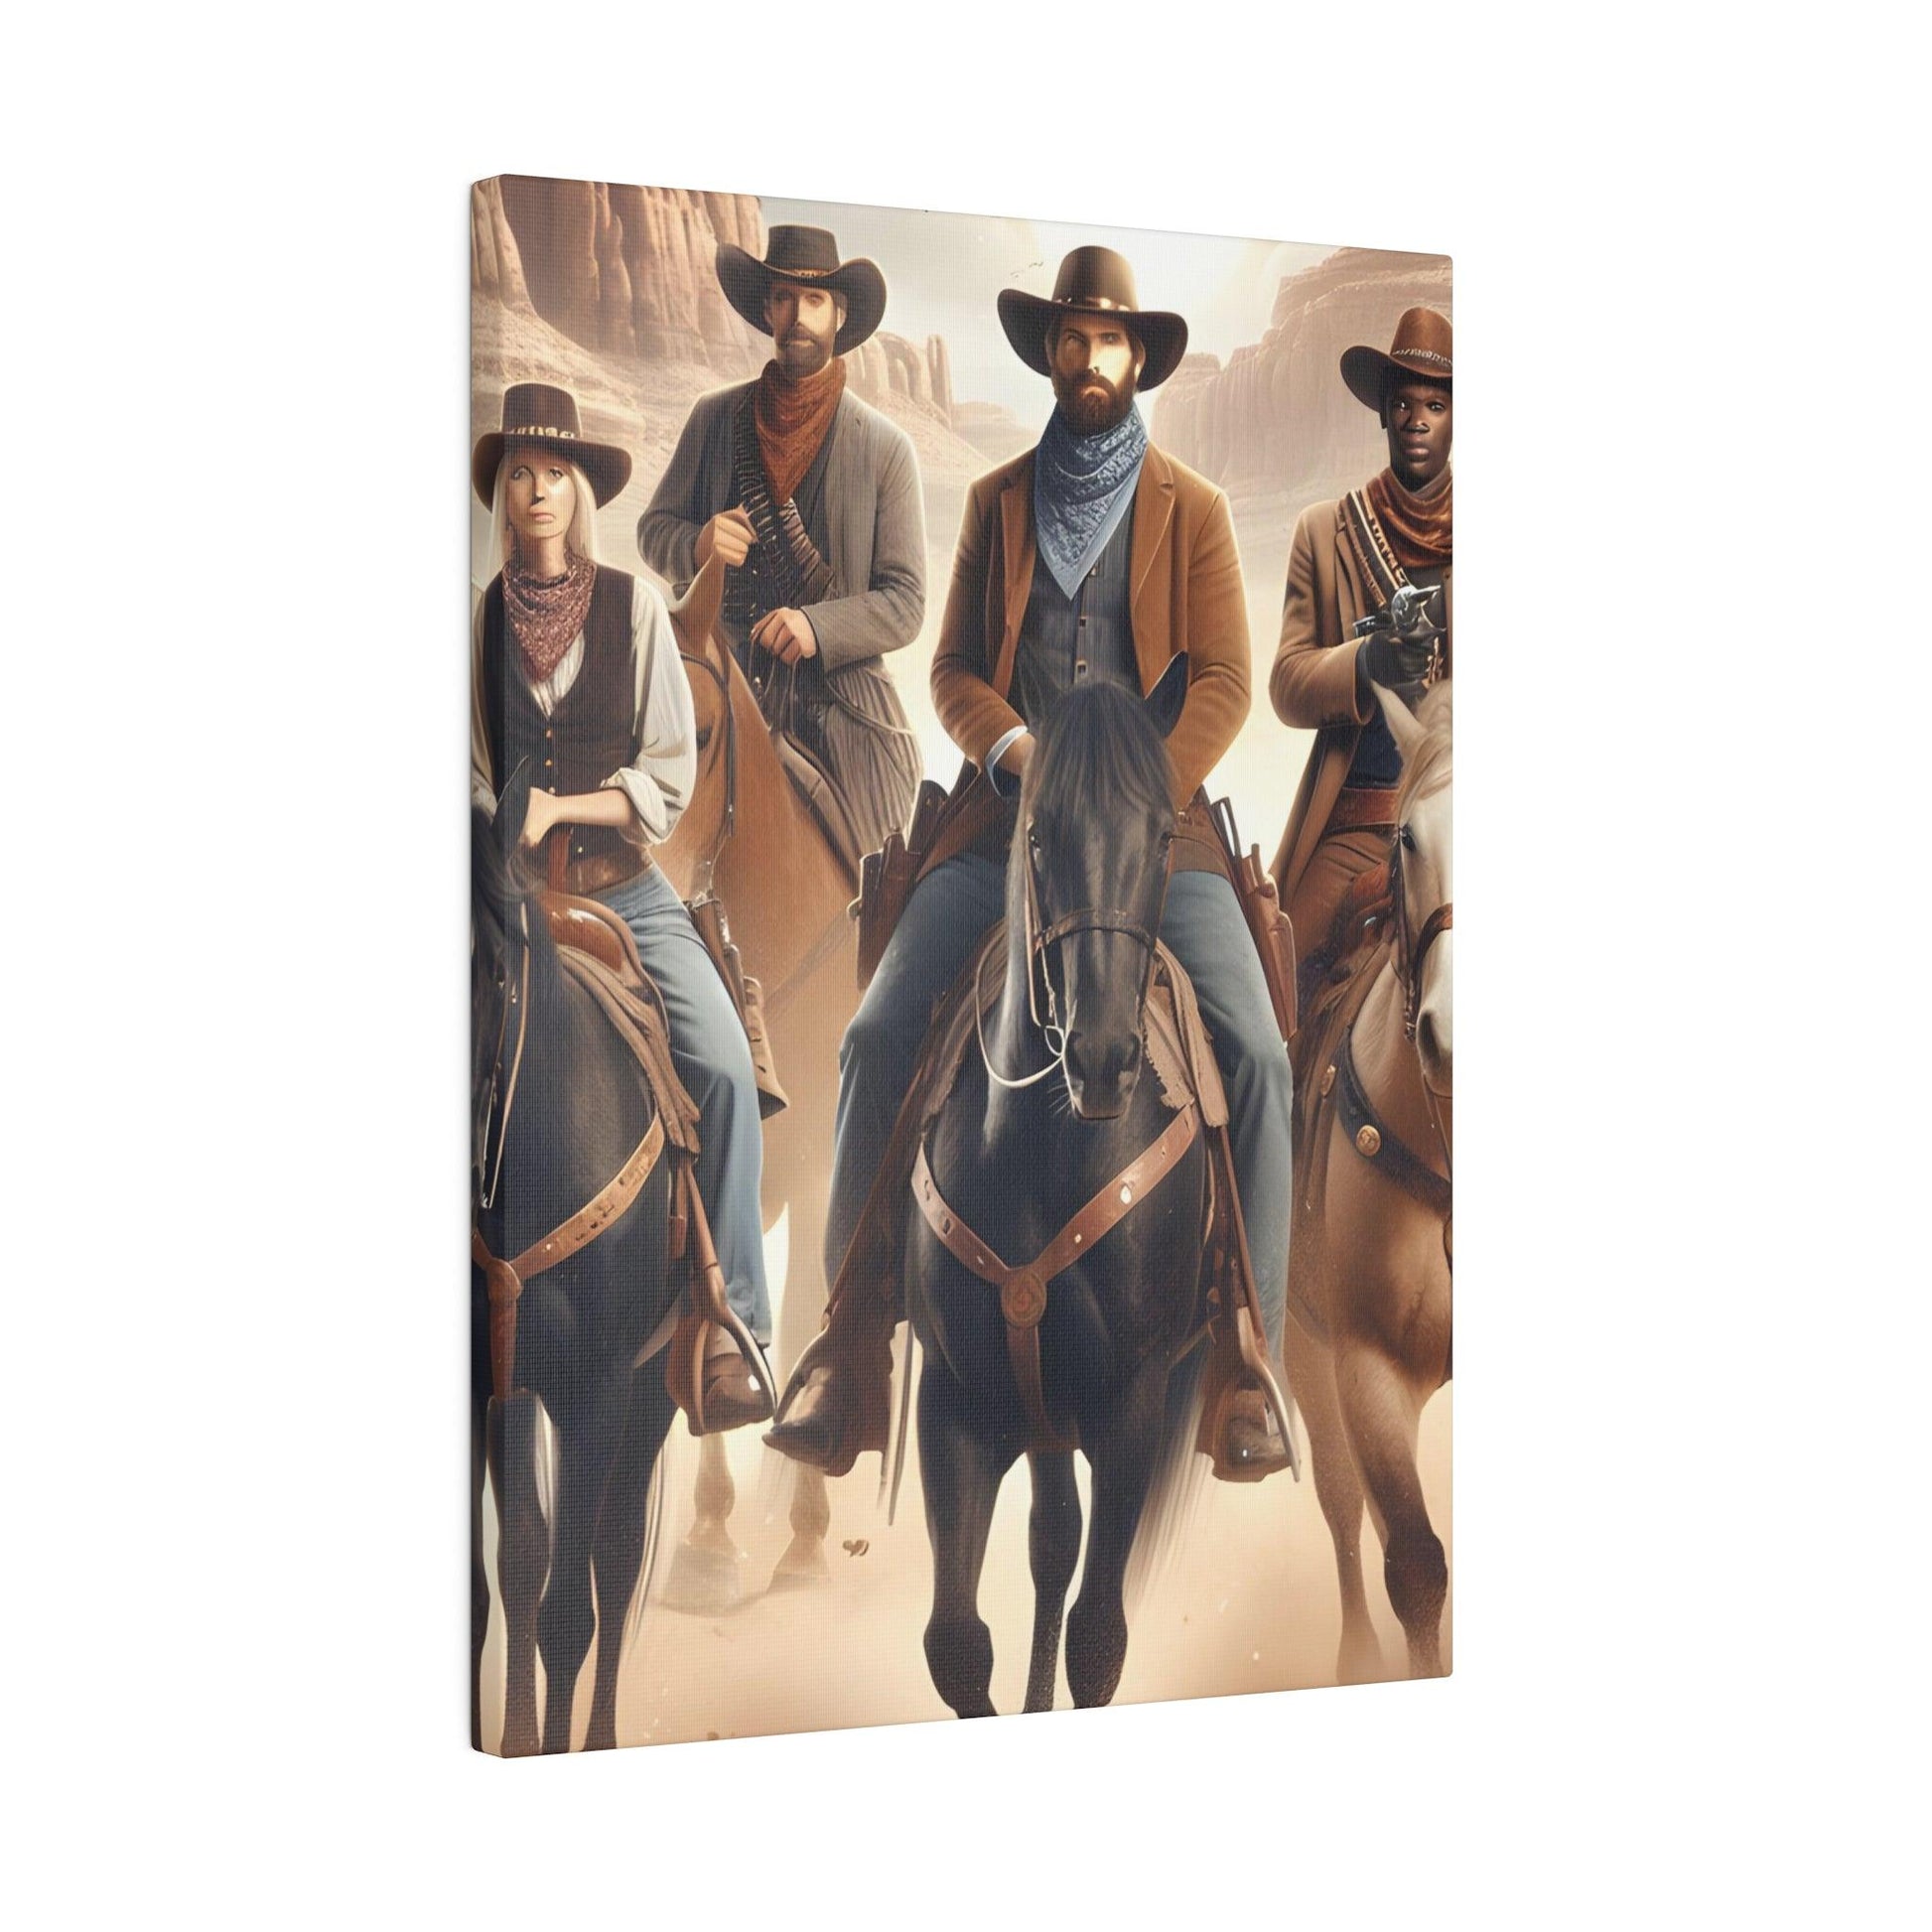 "Cowboy Chronicles: Timeless Canvas Wall Art" - The Alice Gallery